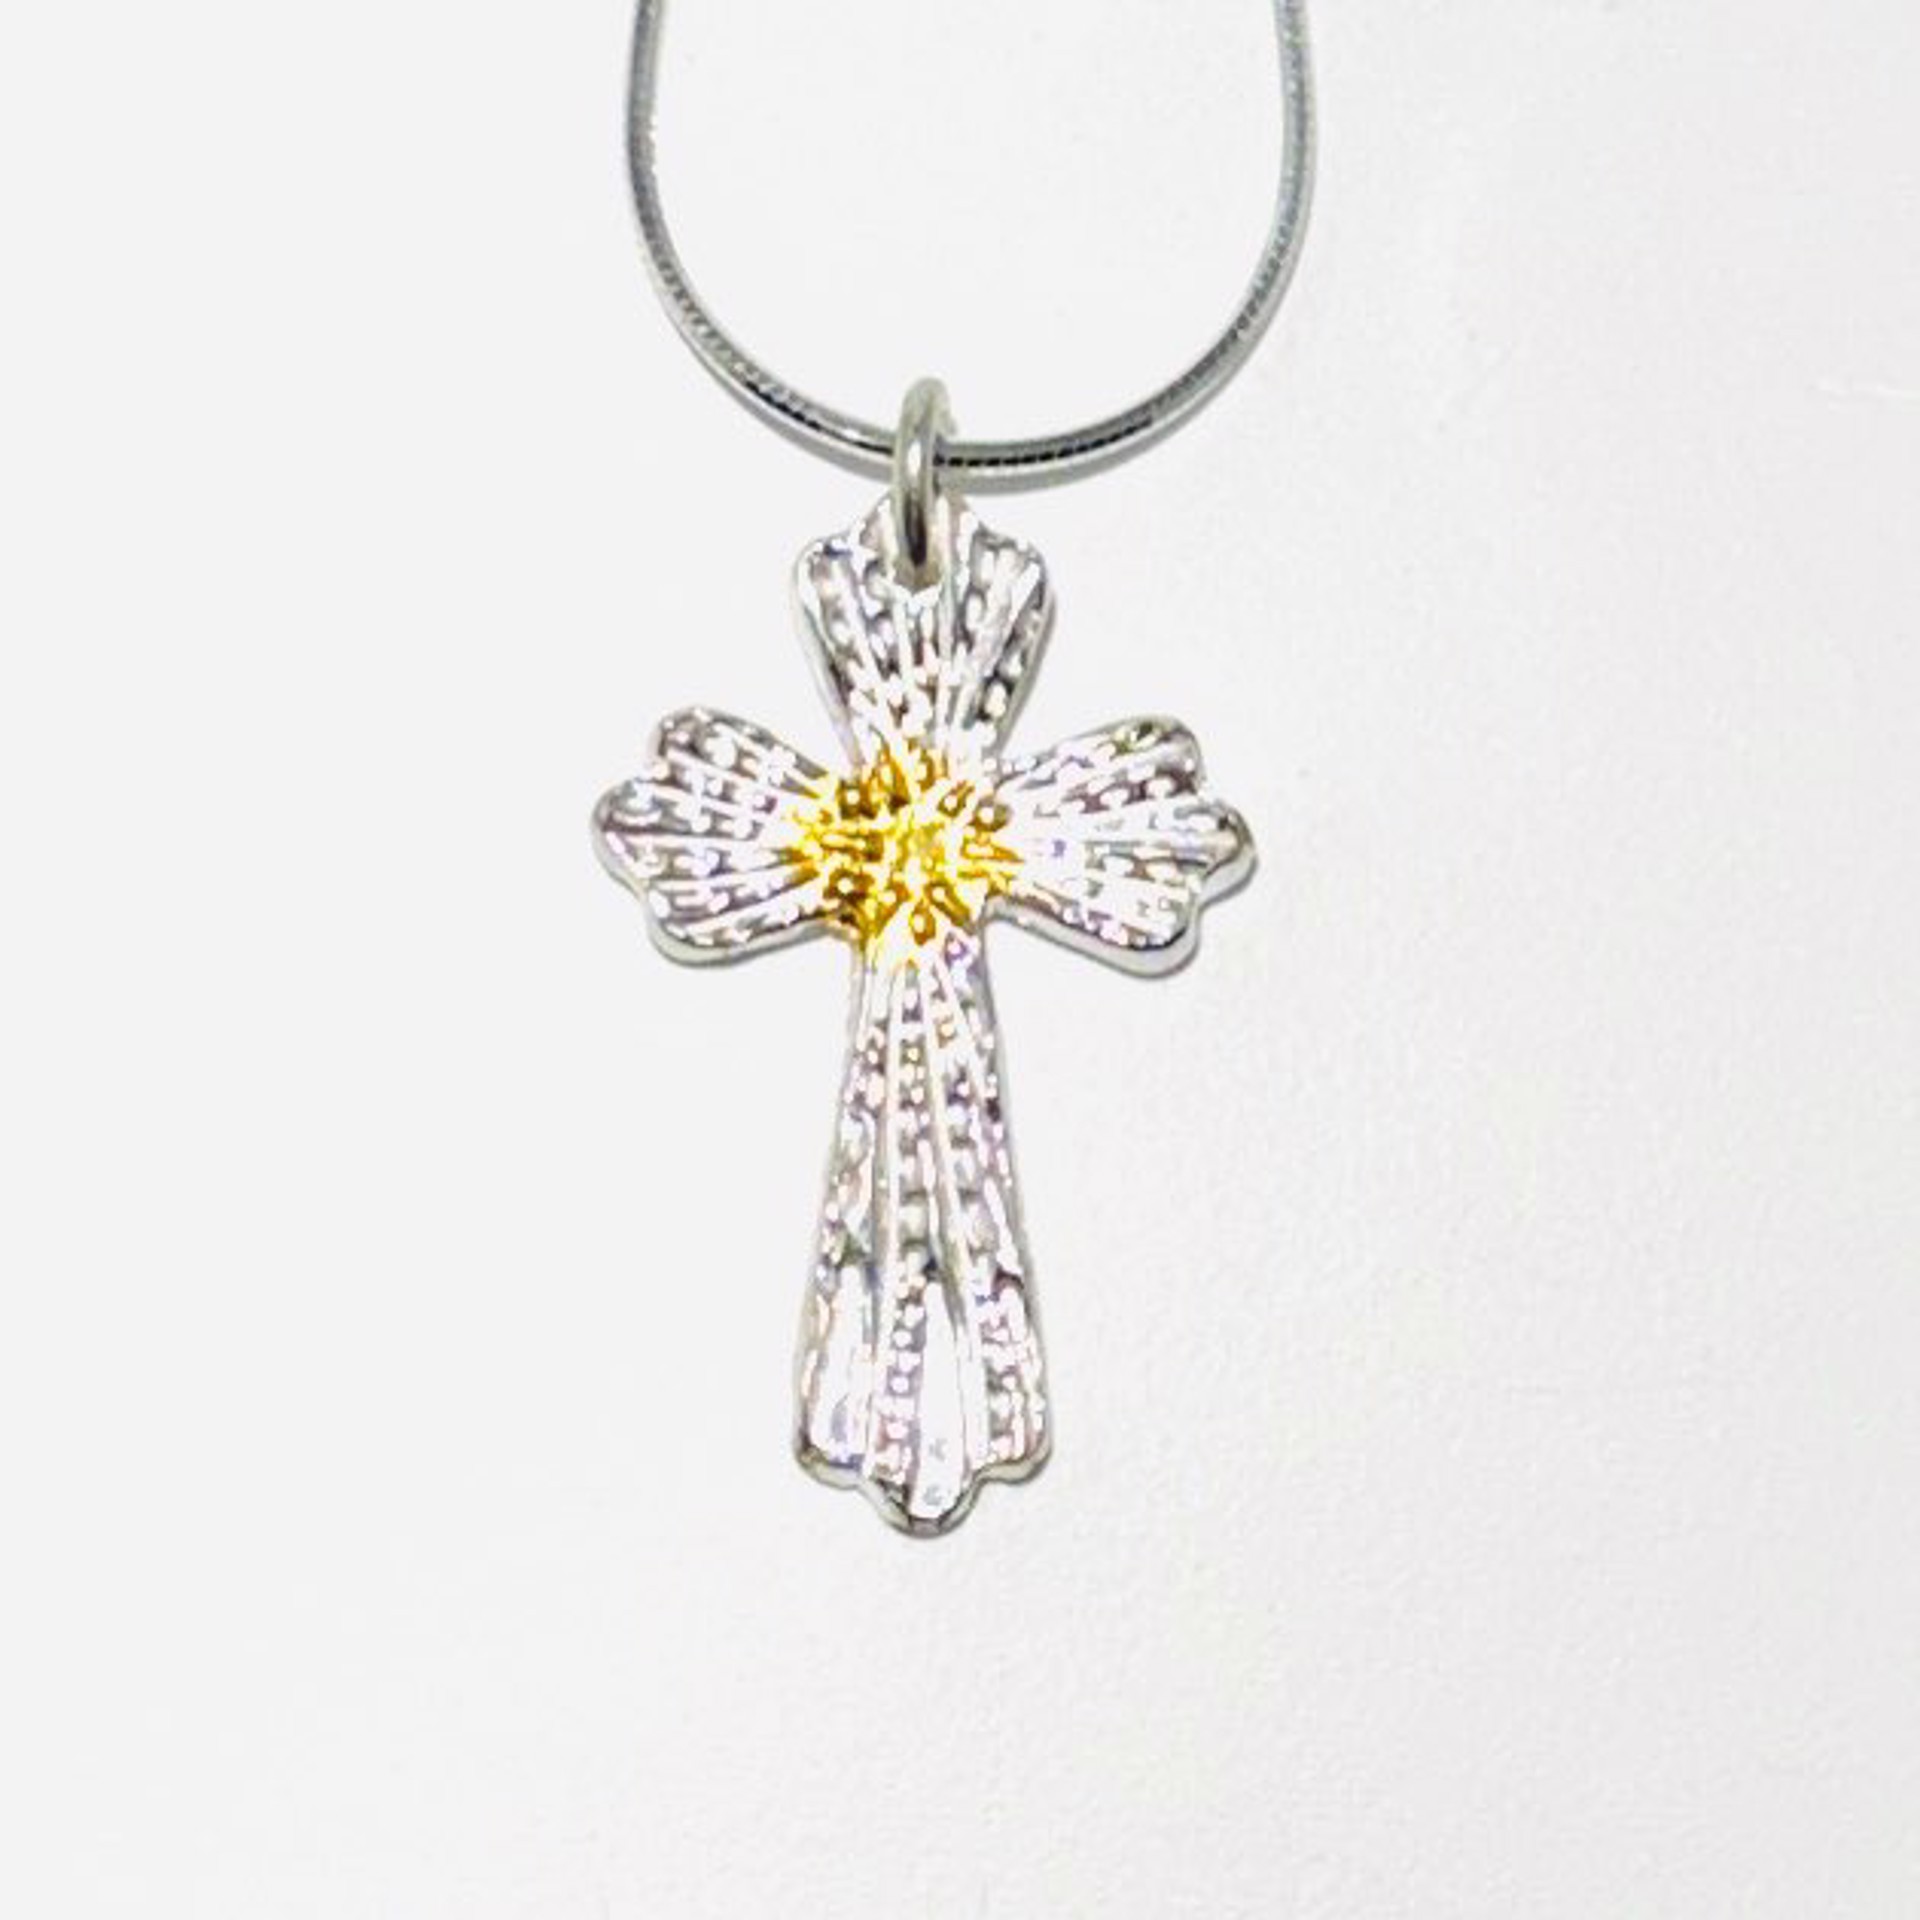 Keum-boo Fine Silver and Gold Cross Necklace KH23-41 by Karen Hakim